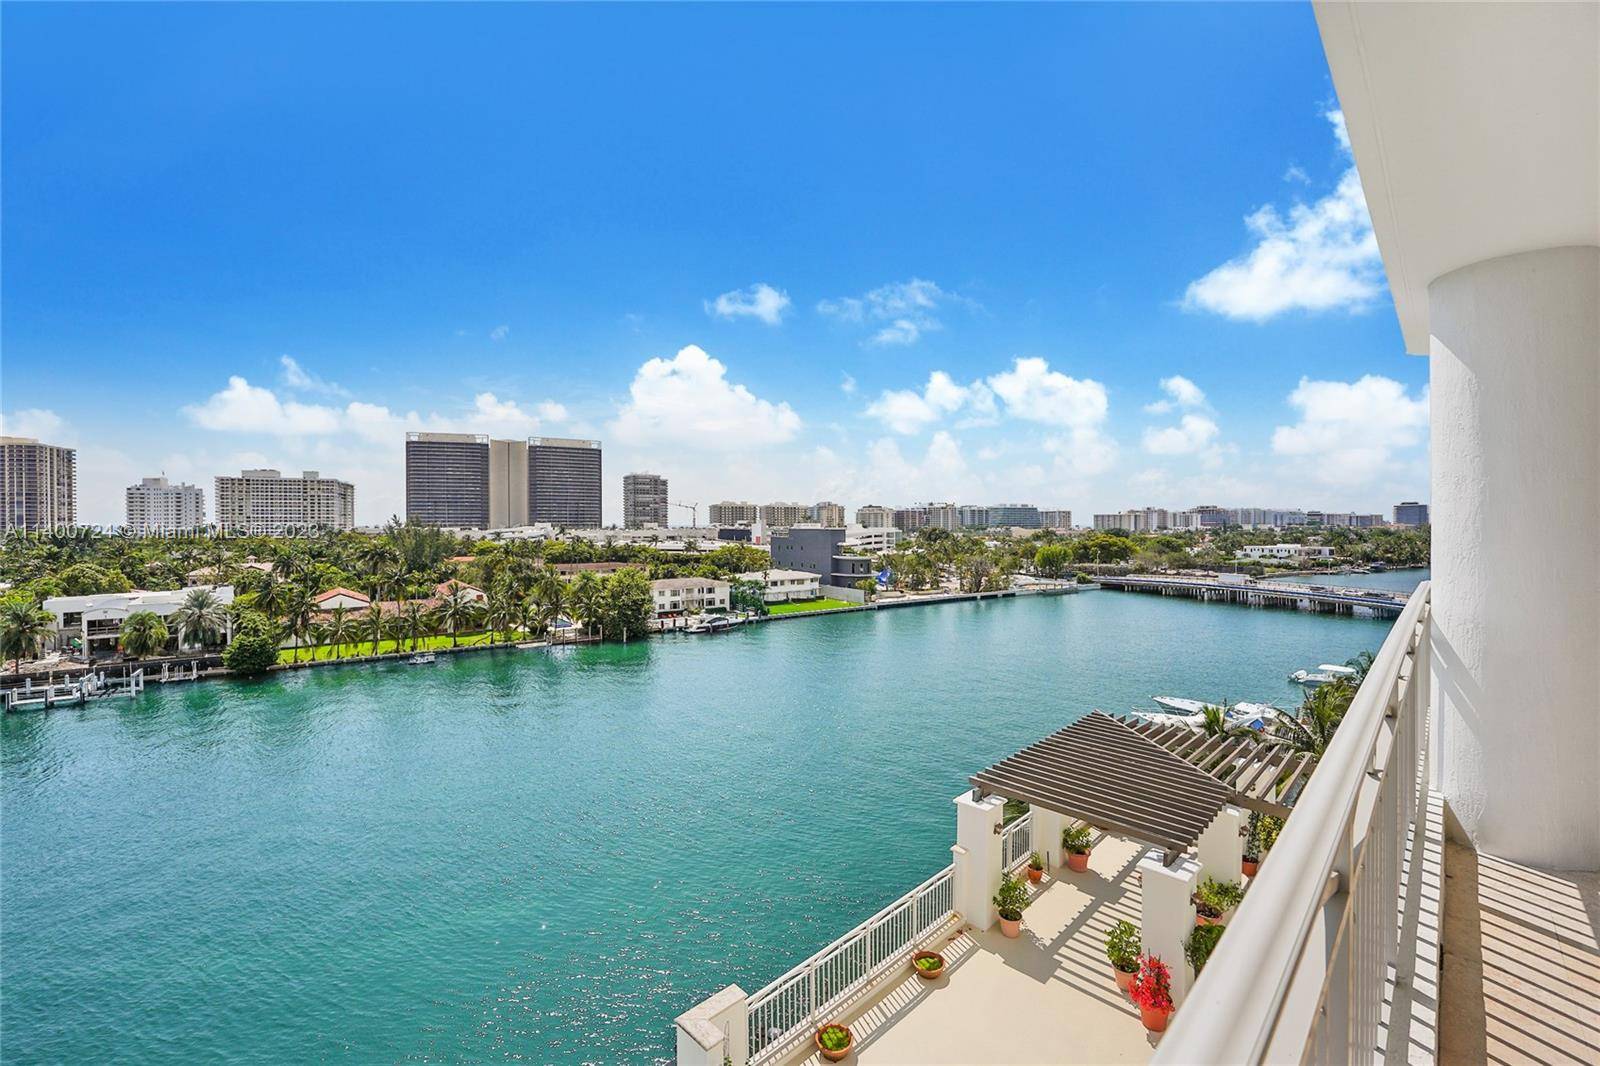 Carroll Walk, a luxury boutique bldg in the highly sought after Bay harbor Islands.